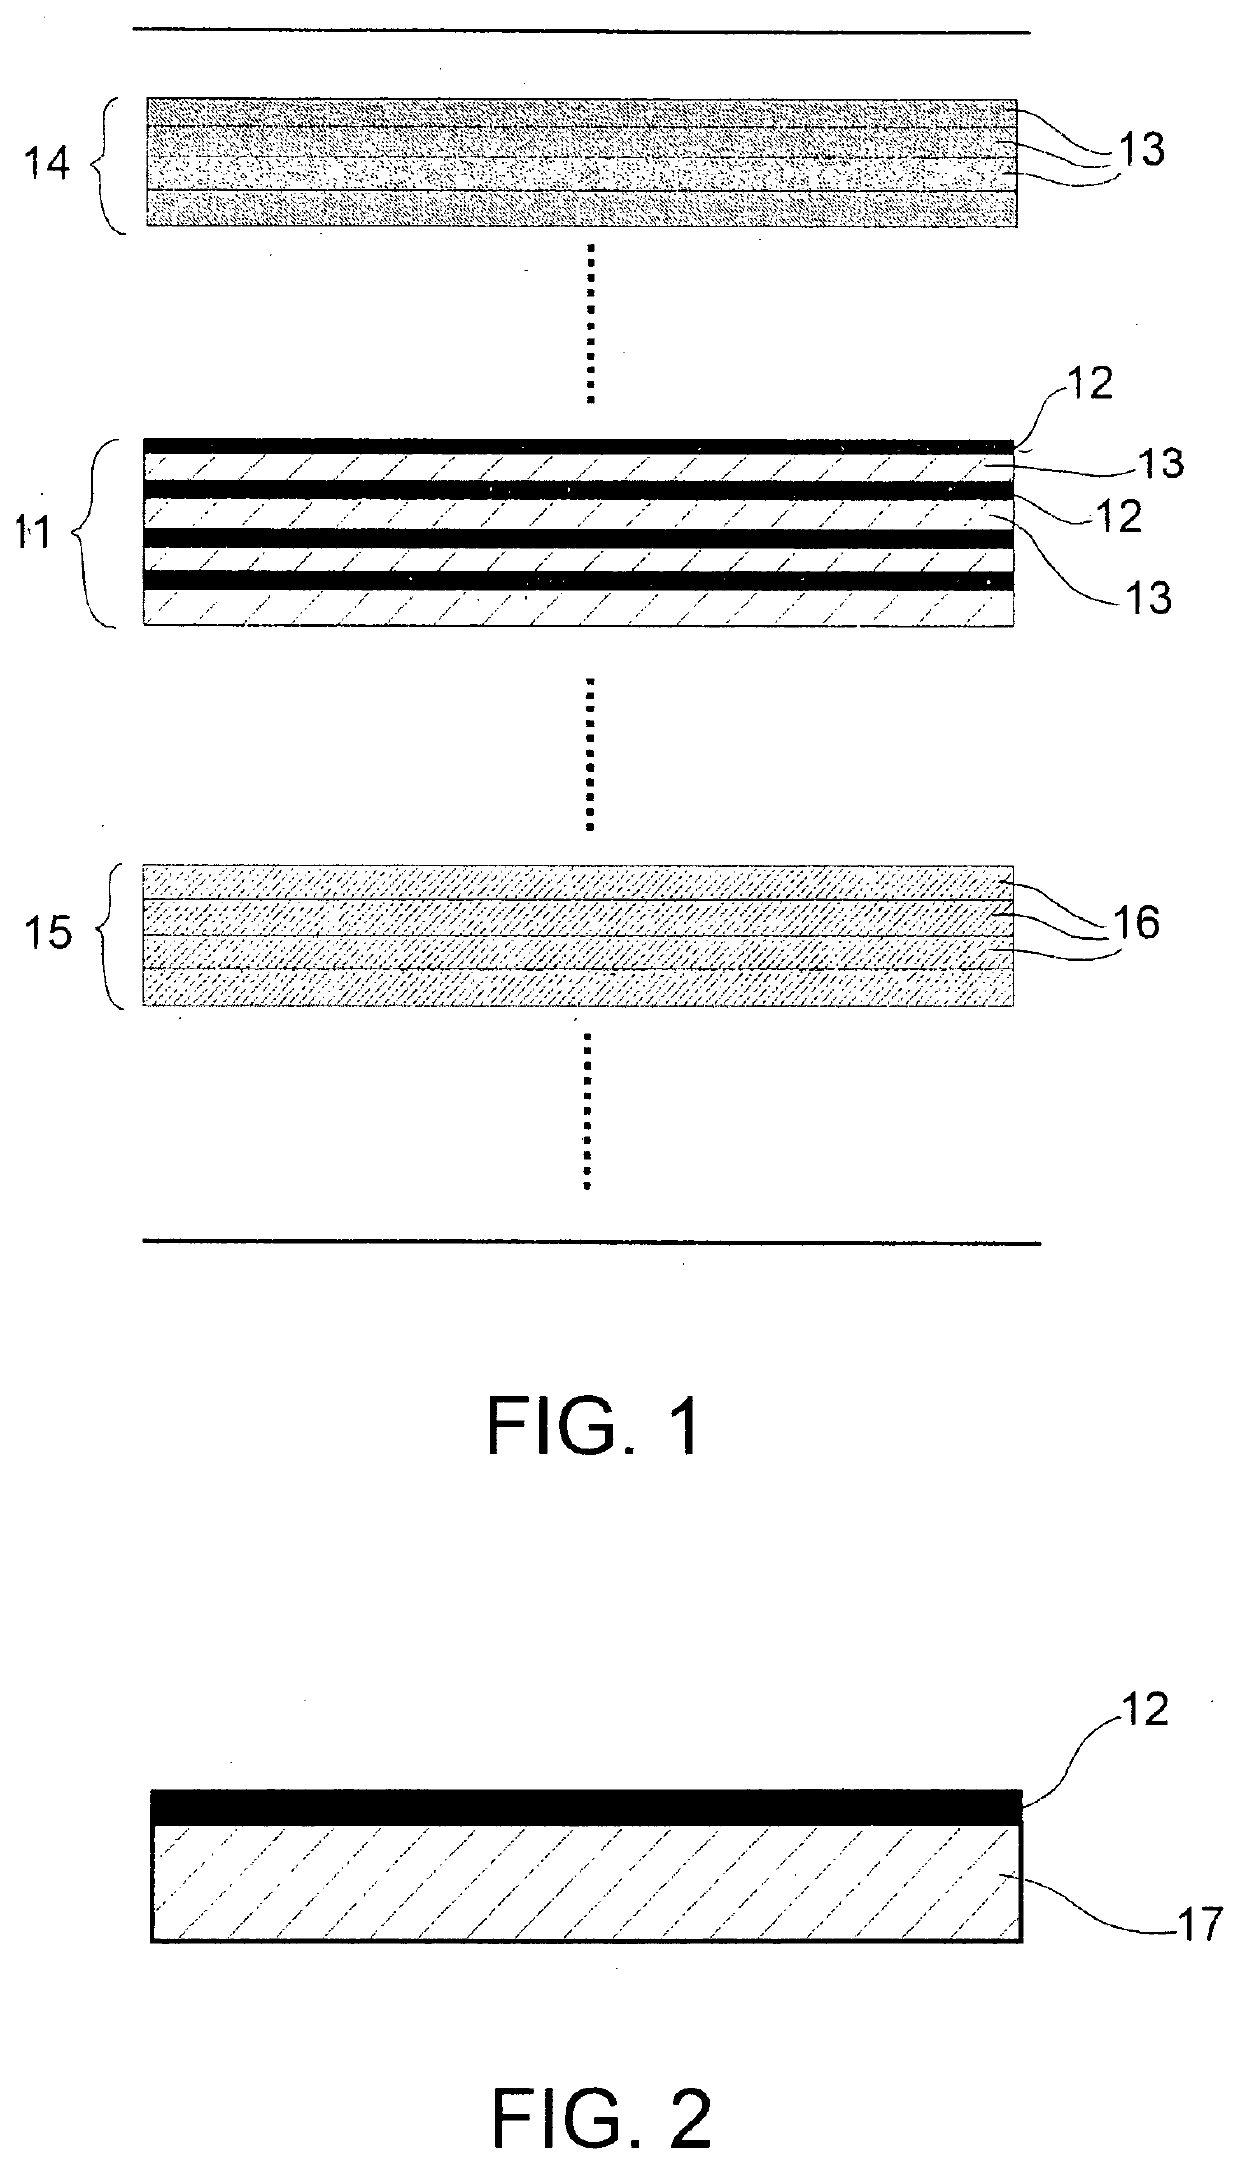 Multilayer radar-absorbing laminate for aircraft made of polymer matrix composite material with graphene nanoplatelets, and method of manufacturing same